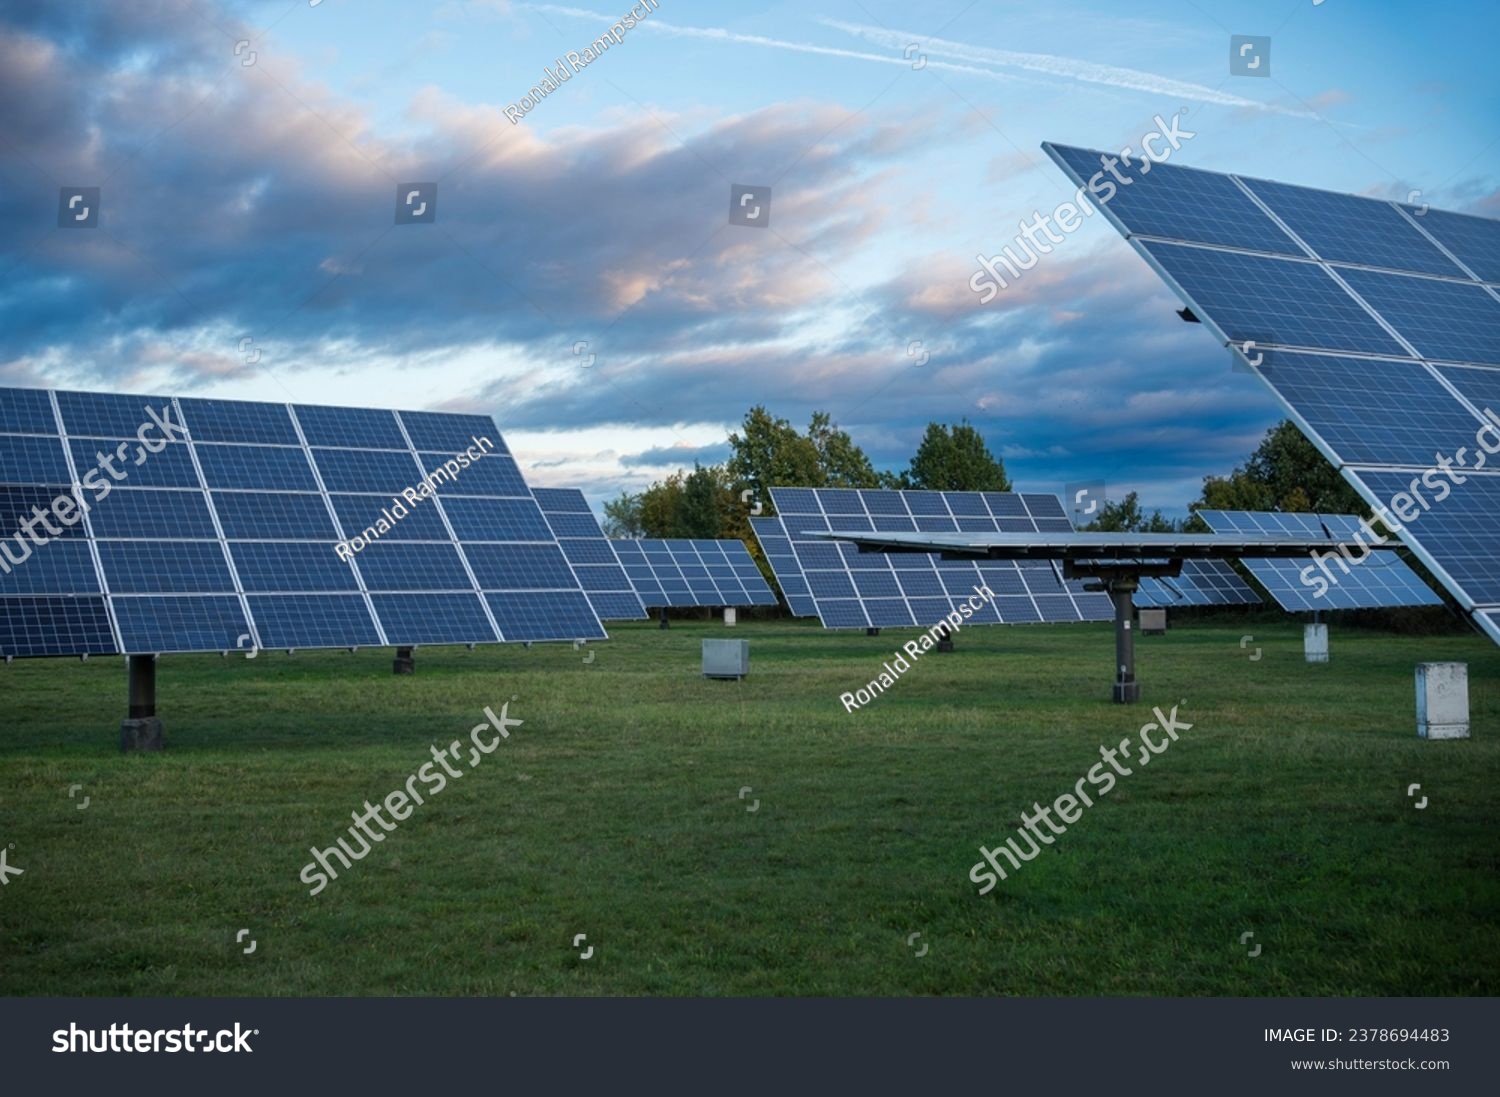 Solar panels that follow the position of the sun through tracker  #2378694483